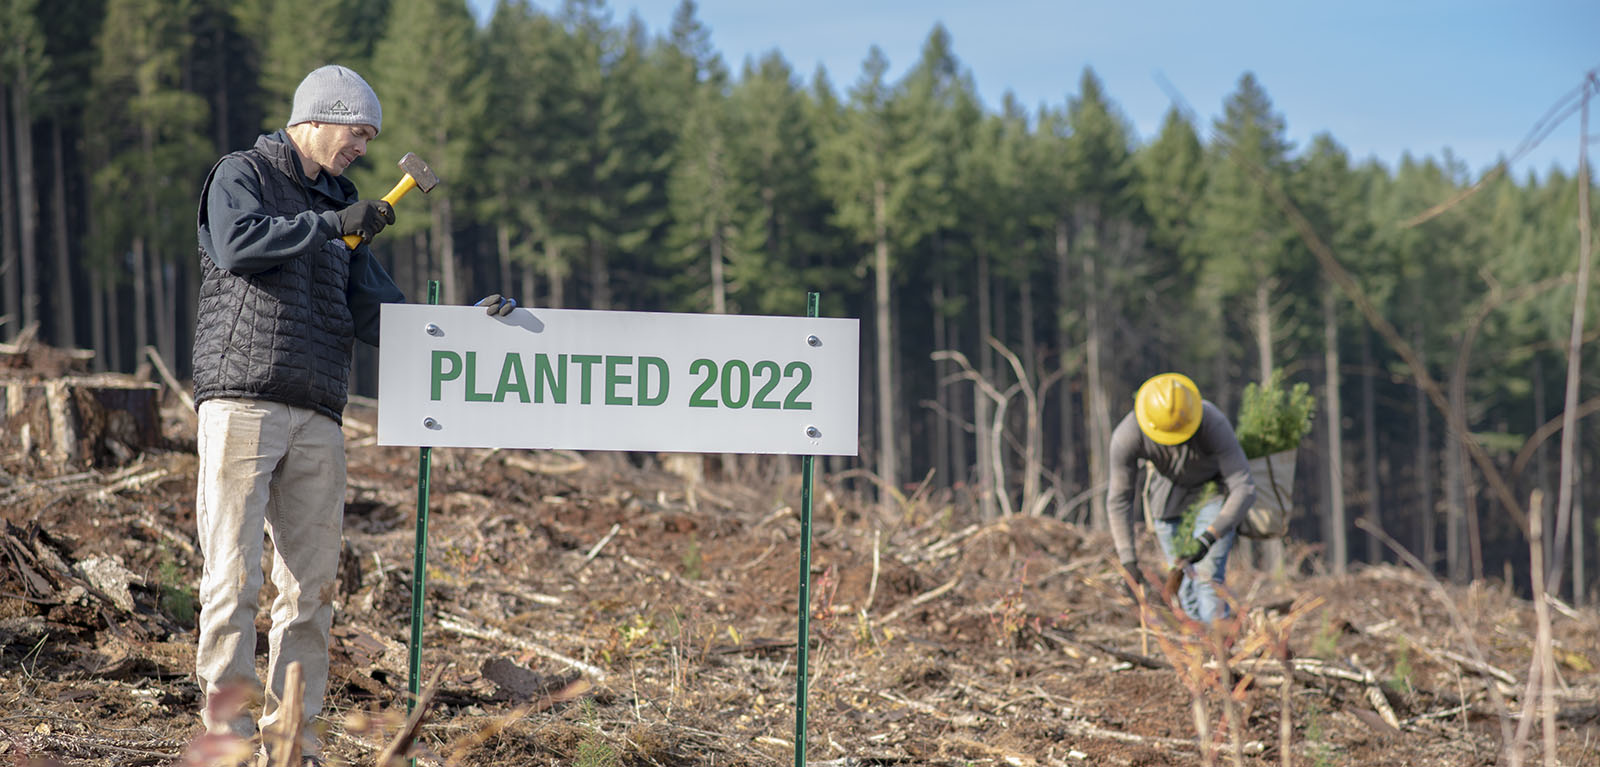 Person hammering "planted 2022" sign